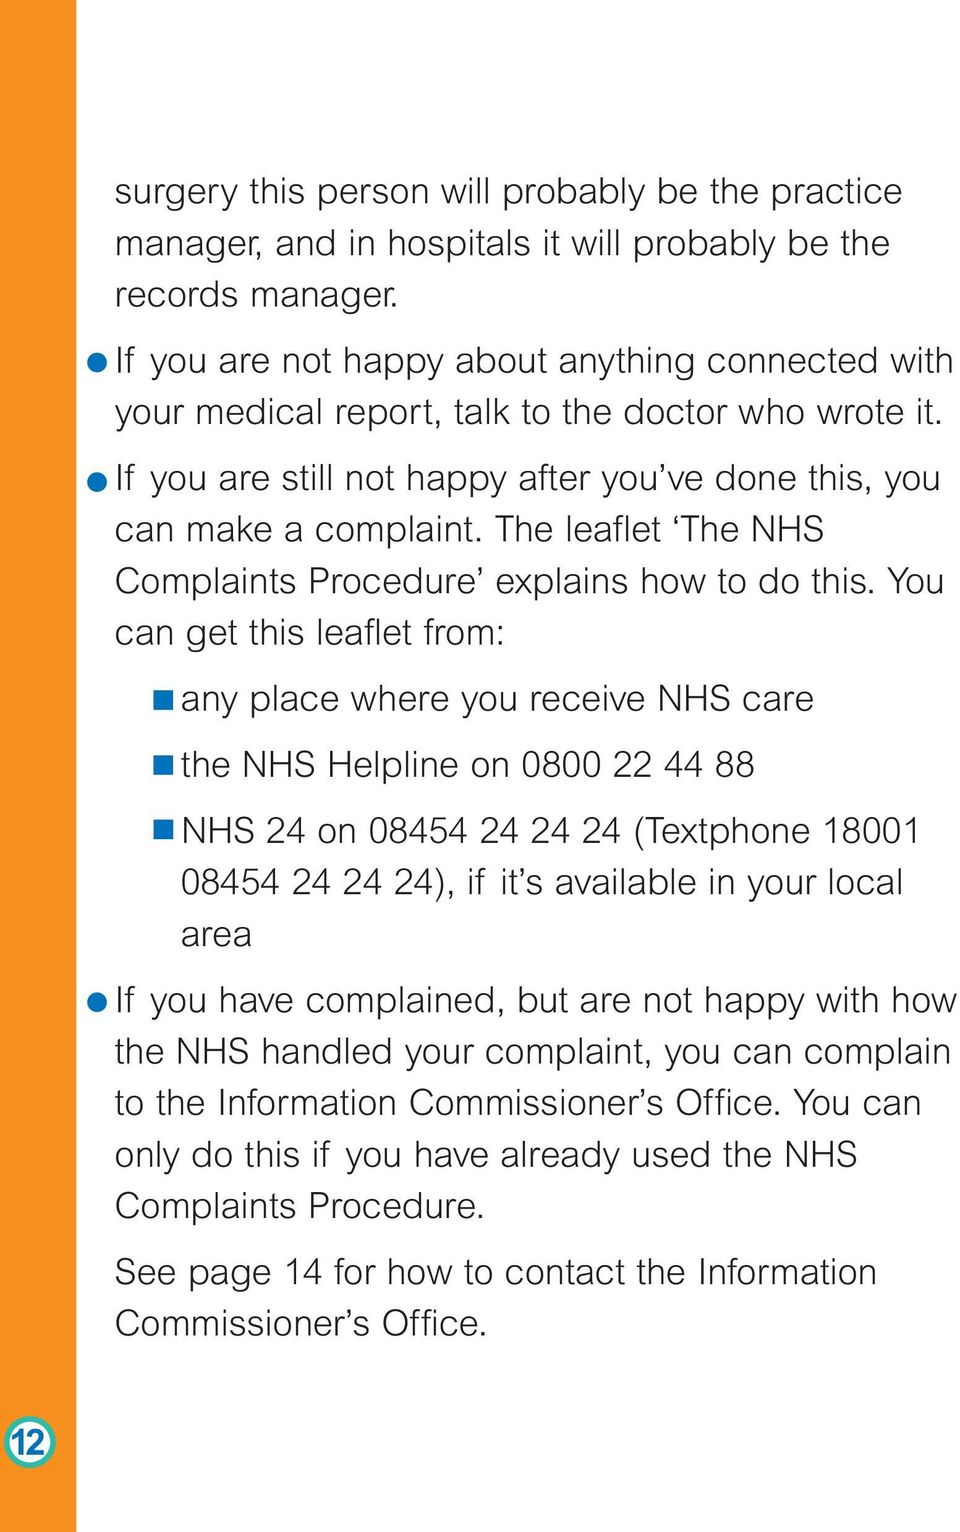 The leaflet The NHS Complaints Procedure explains how to do this.